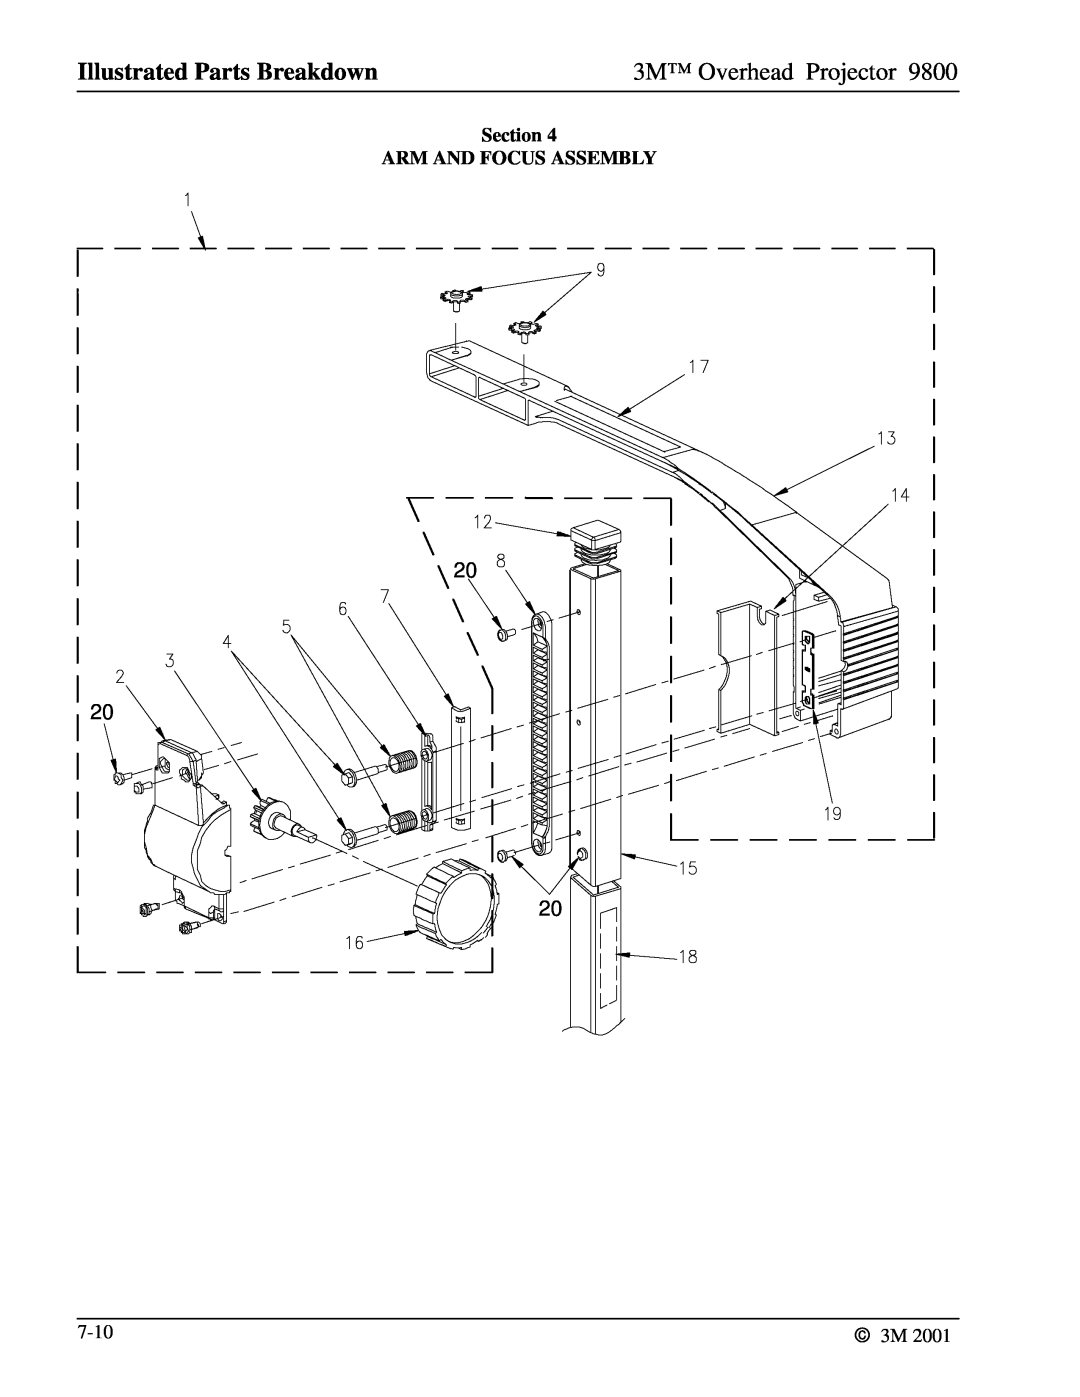 3M 9800 manual Section ARM AND FOCUS ASSEMBLY, Illustrated Parts Breakdown, 3M Overhead Projector 